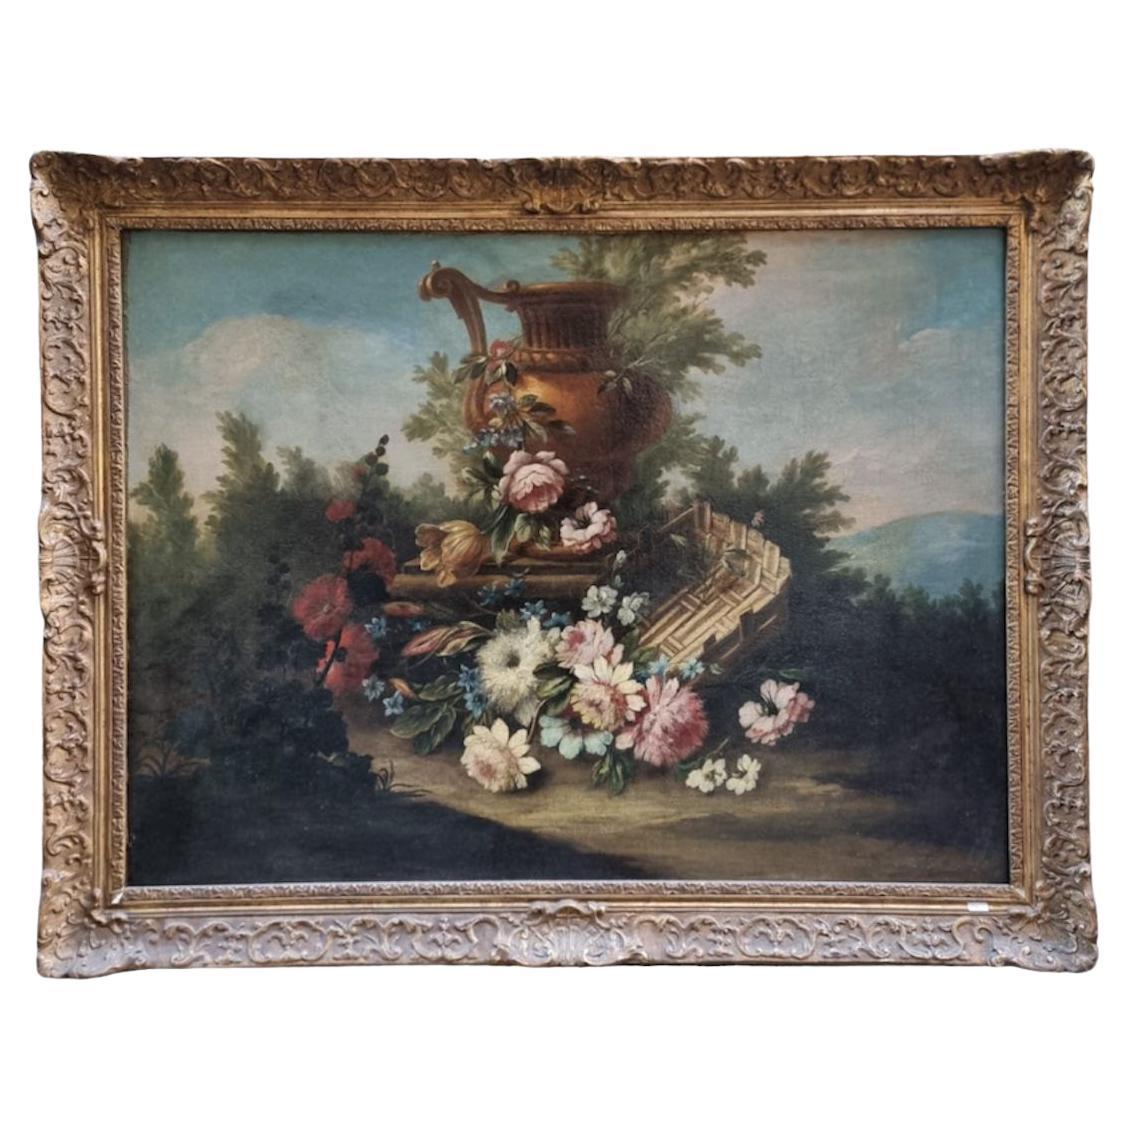 Oil painting on canvas depicting still life 18th century